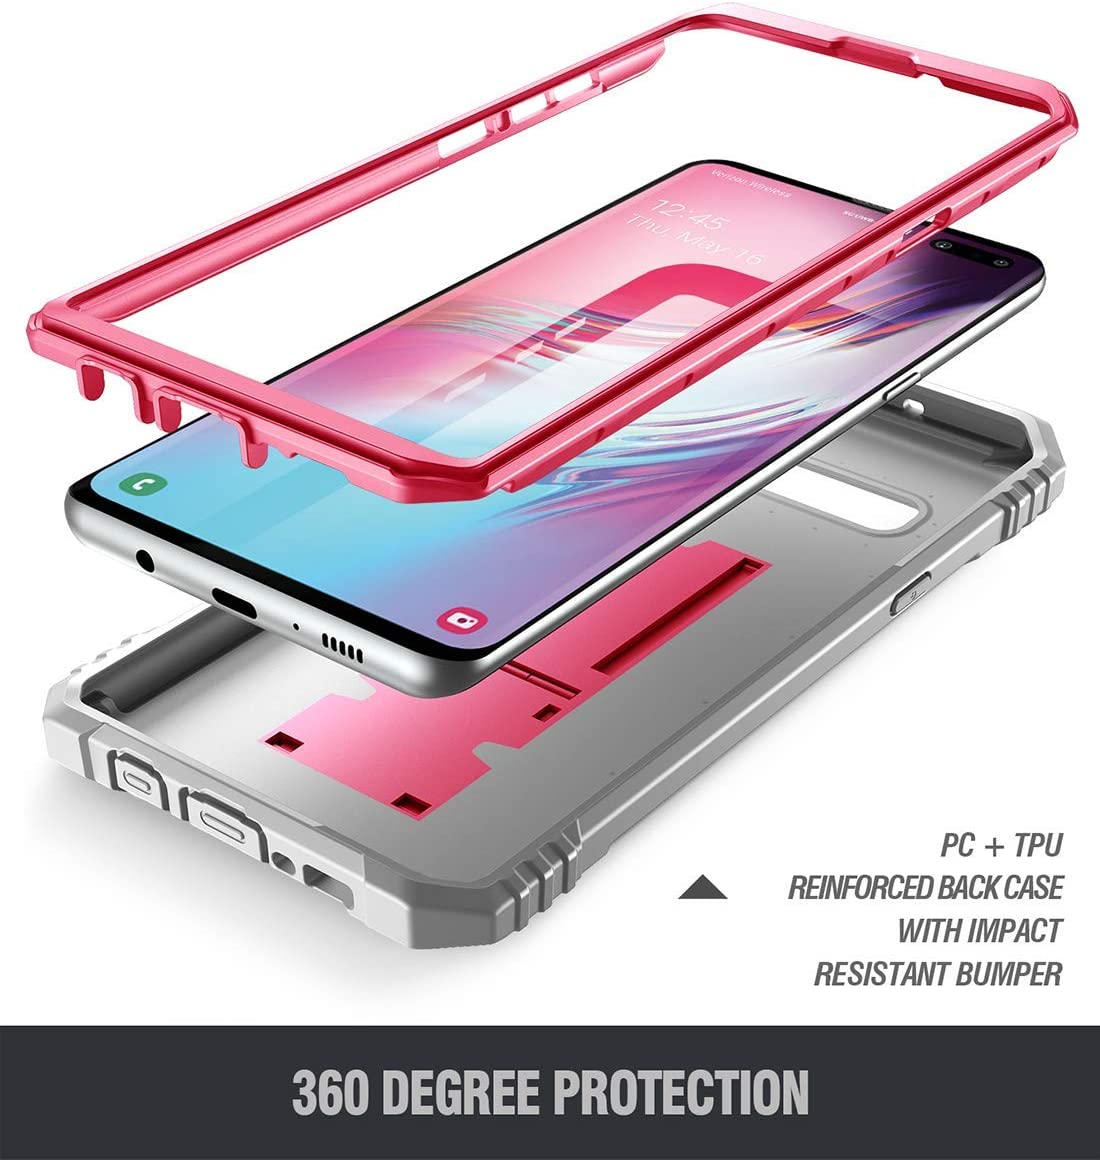 Galaxy S10 5G Rugged Case with Kickstand, Poetic Full-Body Dual-Layer Shockproof Protective Cover - e4cents